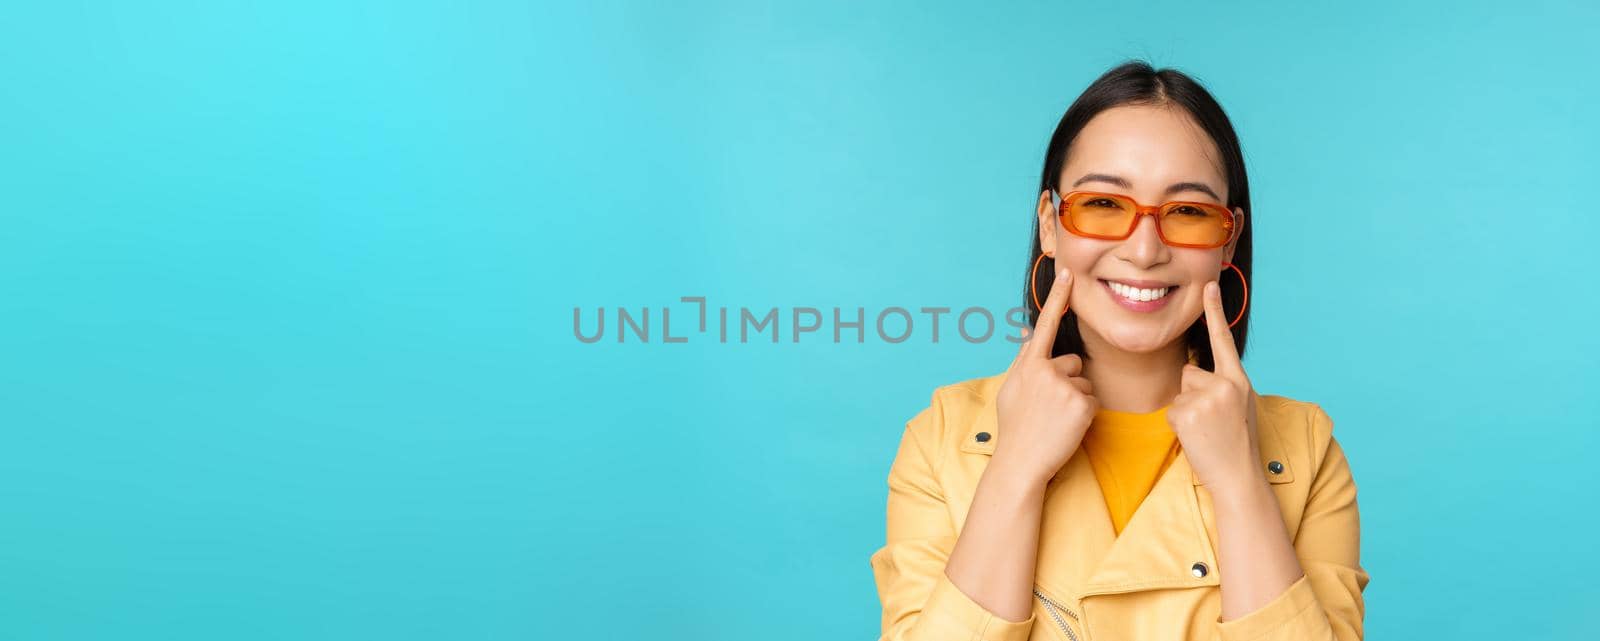 Close up portrait of asian young woman in sunglasses, smiling and looking romantic, standing happy over blue background. Copy space